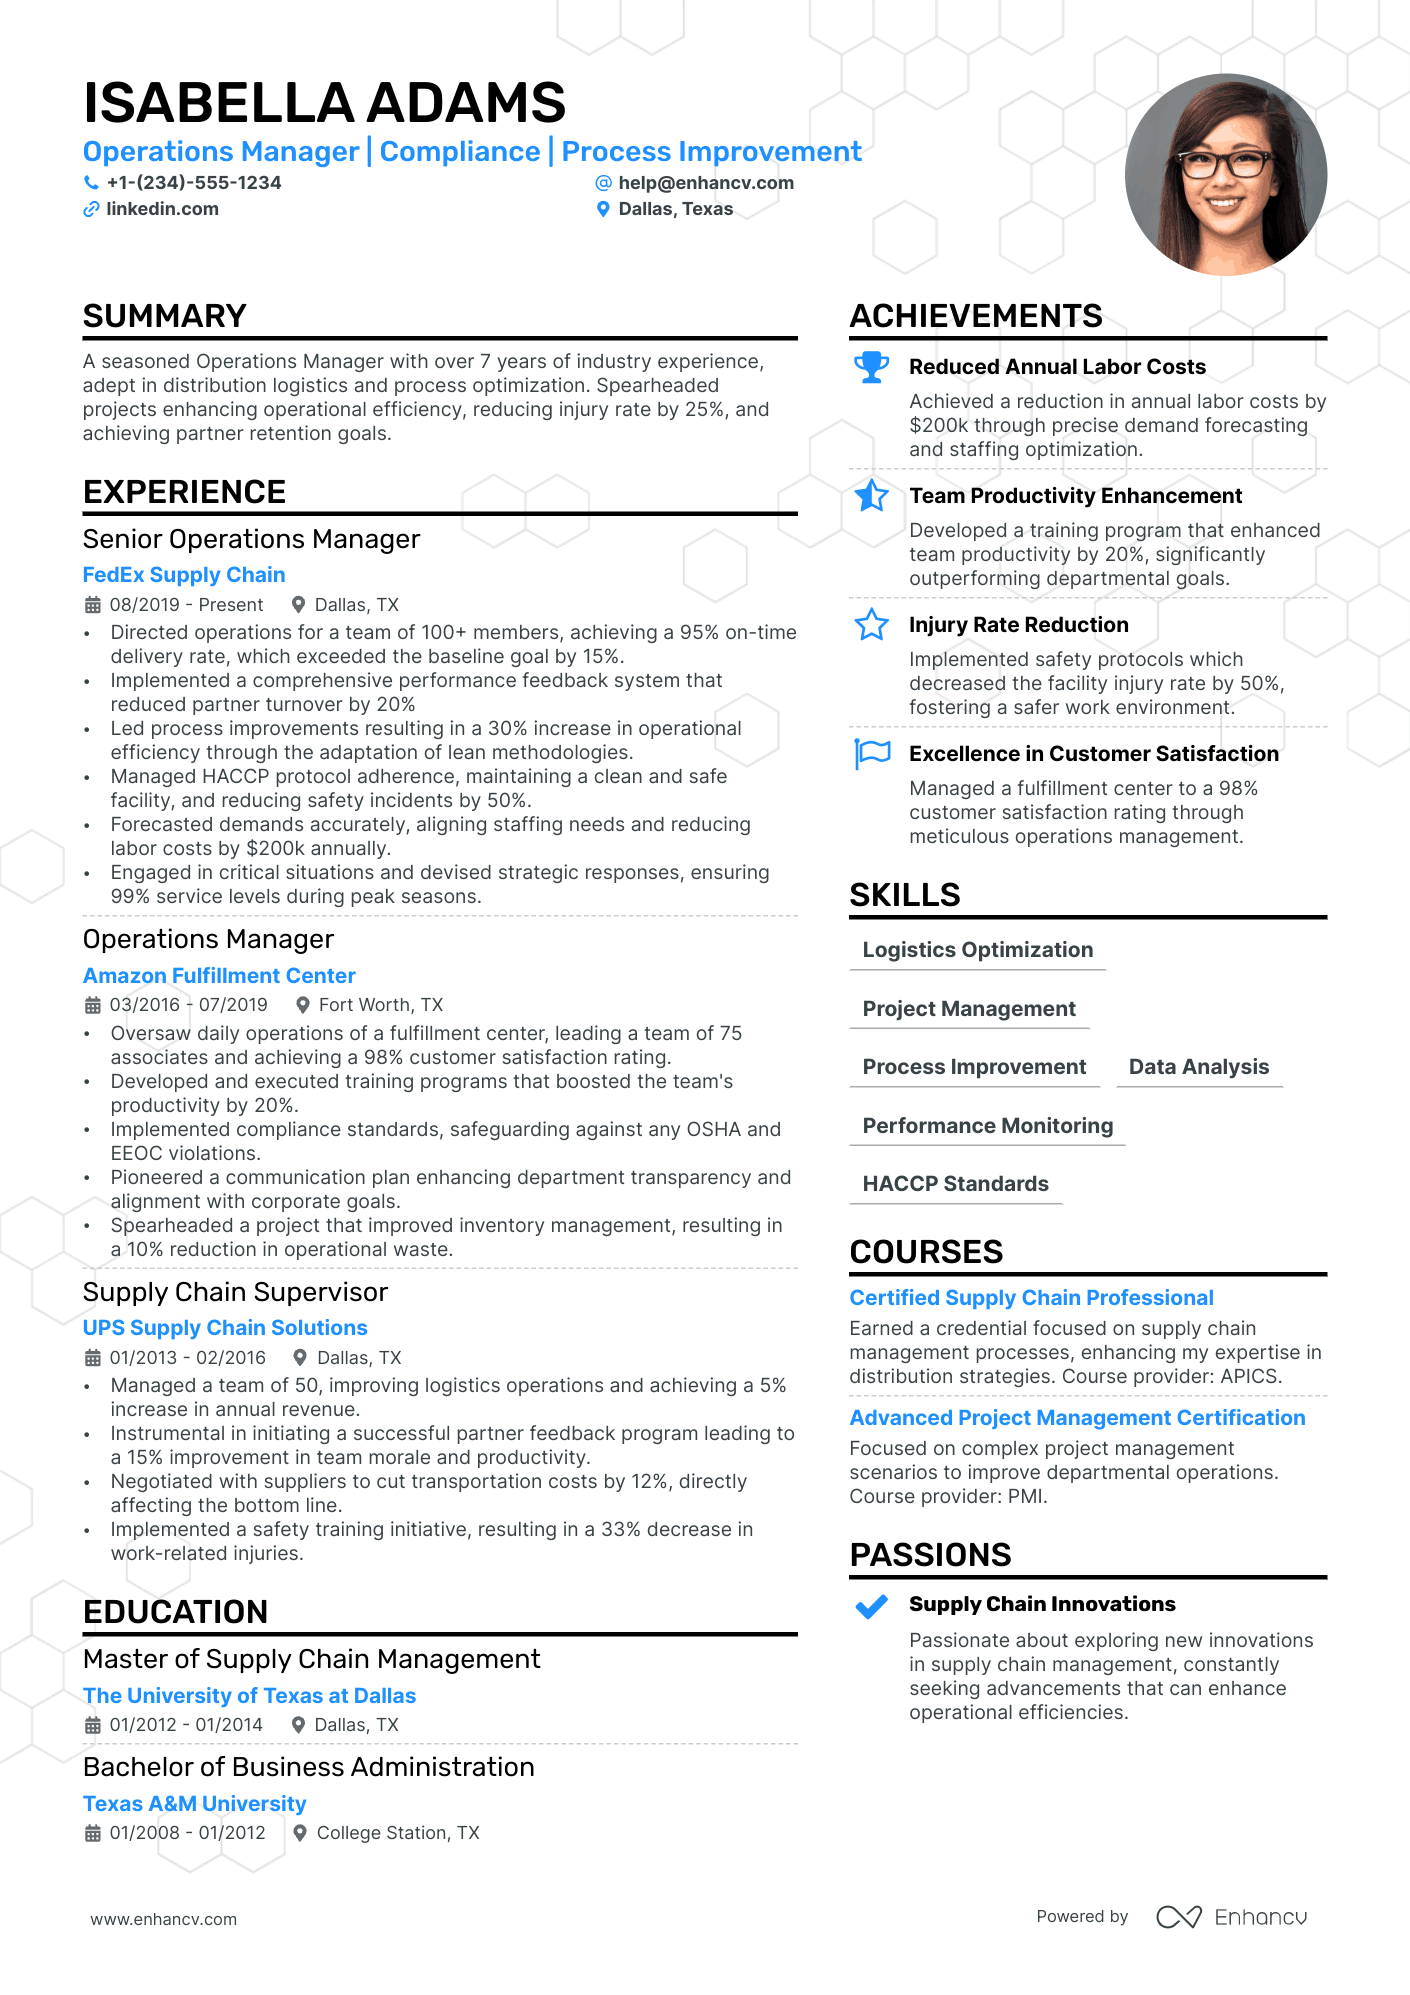 Transportation Operations Manager resume example